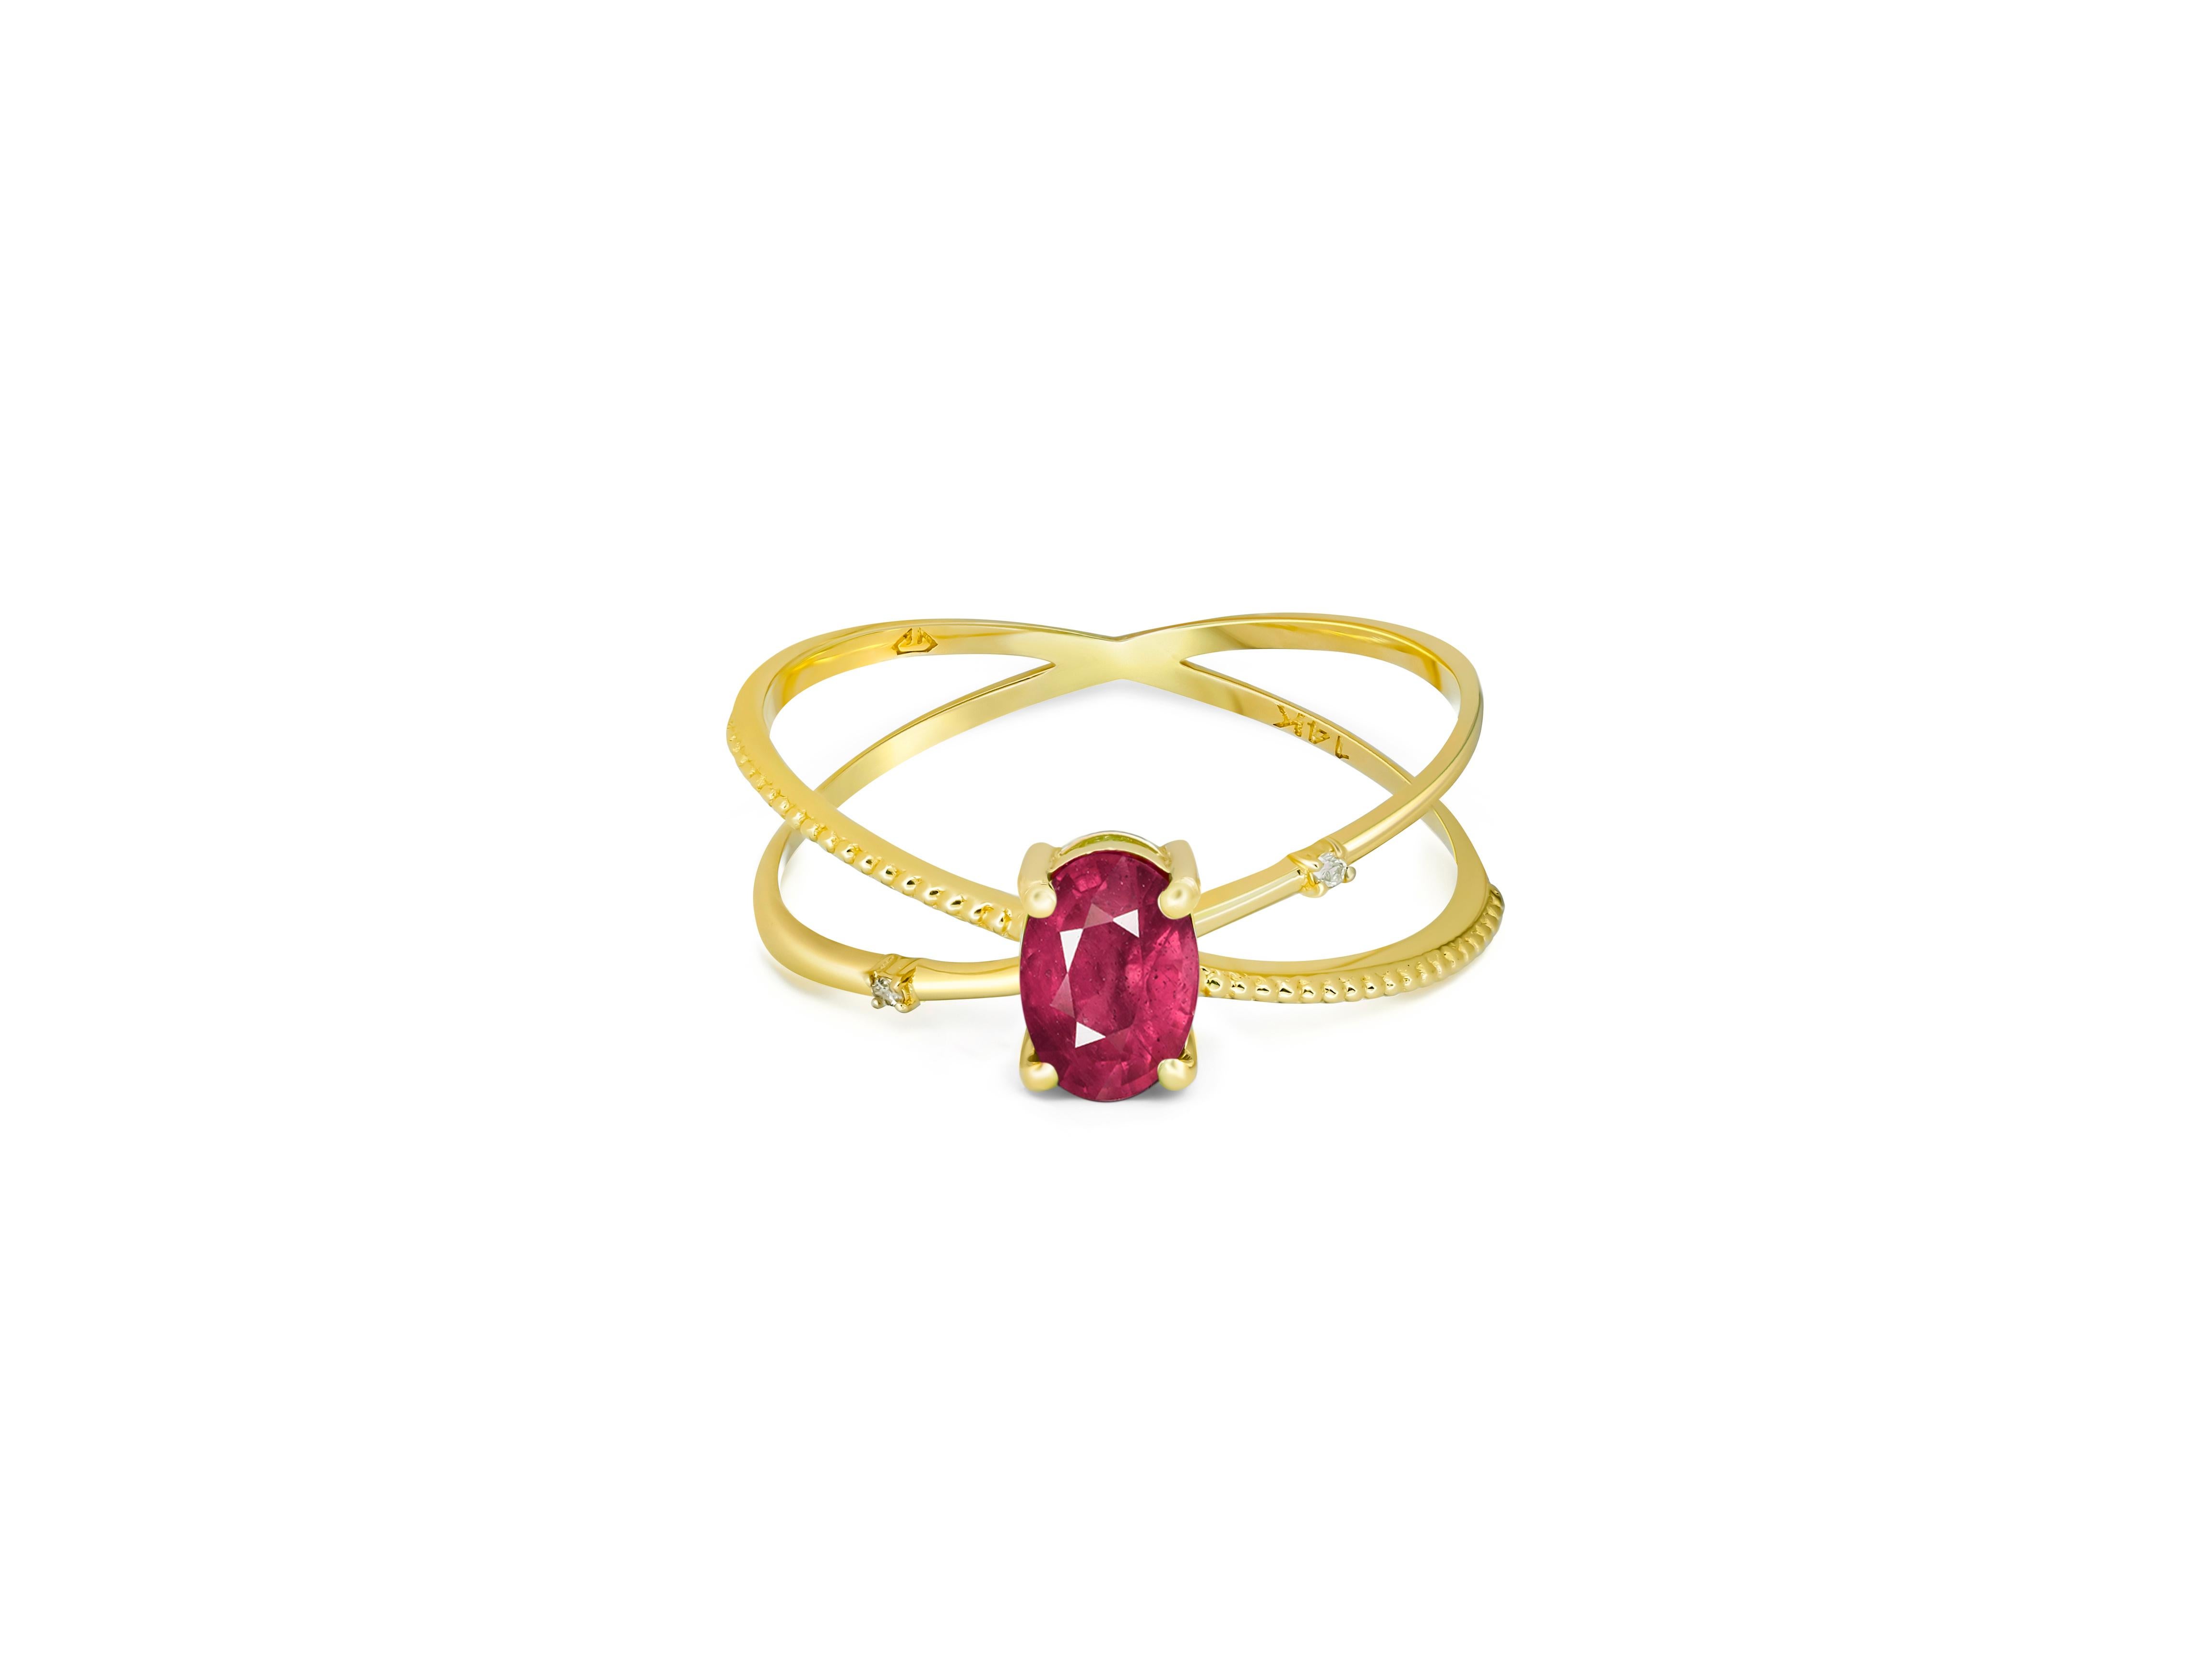 Ruby spiral ring. Oval Ruby ring. Ruby gold ring. 14k gold ring with Ruby. Minimalist Ruby ring. Ruby engagement ring. July Birthstone Ring. Ruby Vintage ring. Ruby Dainty ring. Ruby Wrap Around Ring. Ruby Ring for Women

Metal: 14k gold
Total